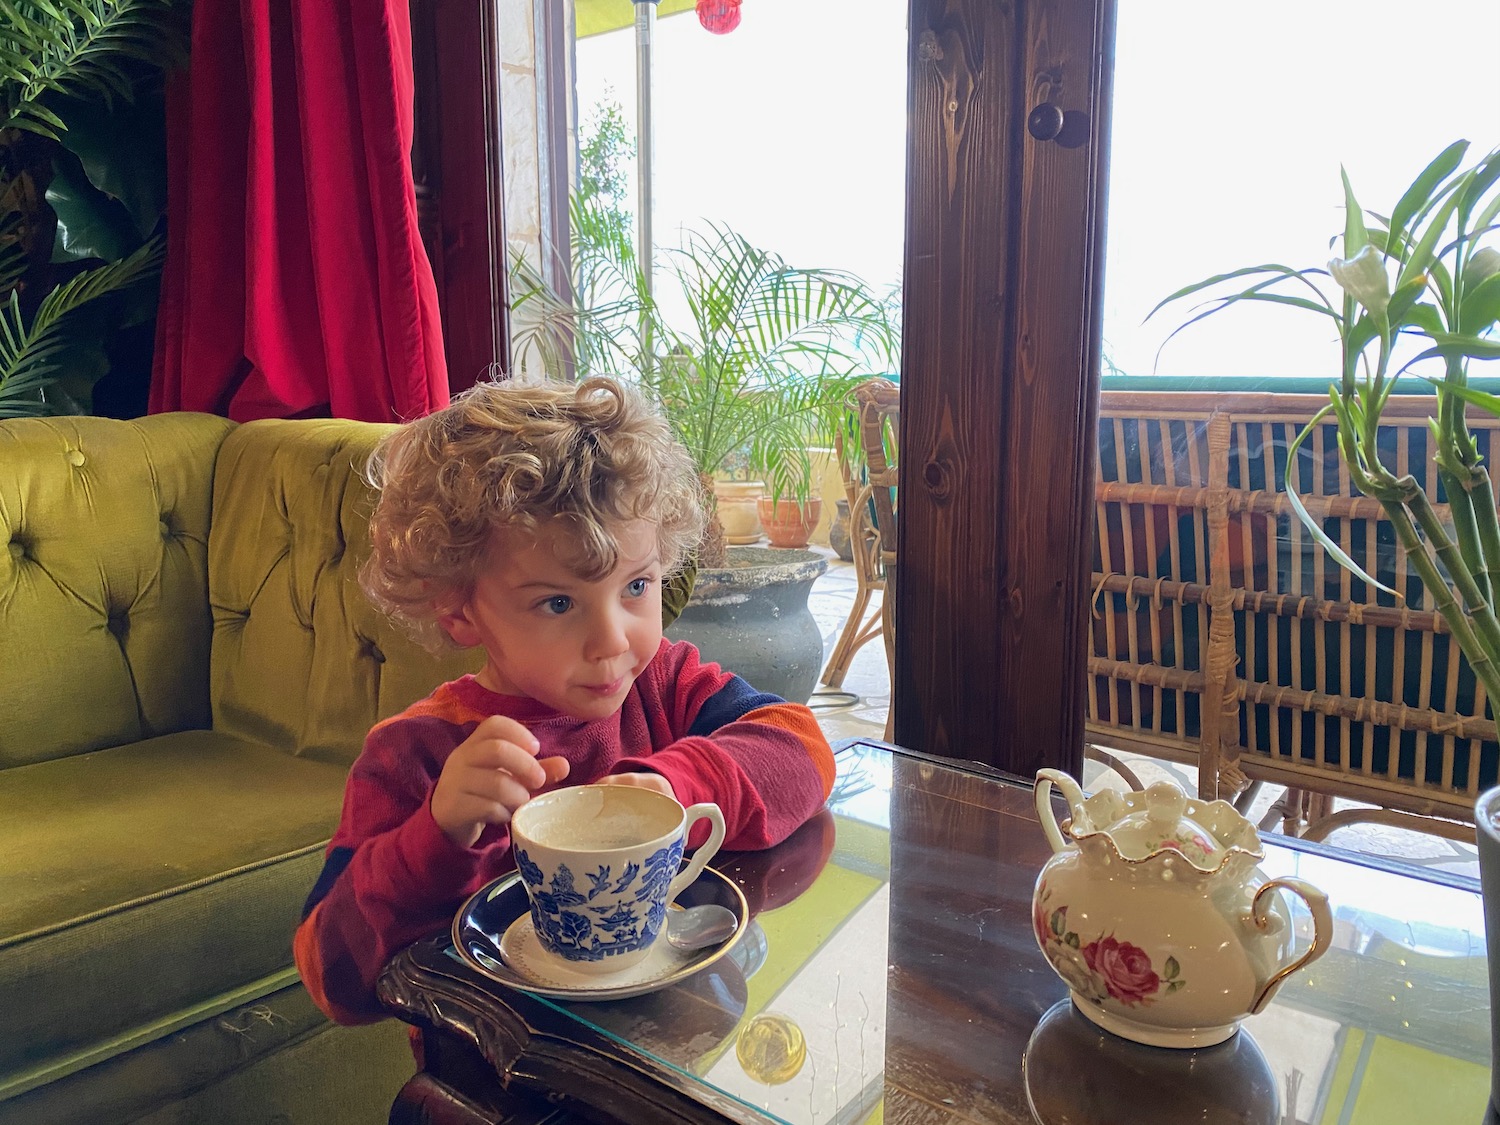 a child sitting at a table with a tea cup and saucer